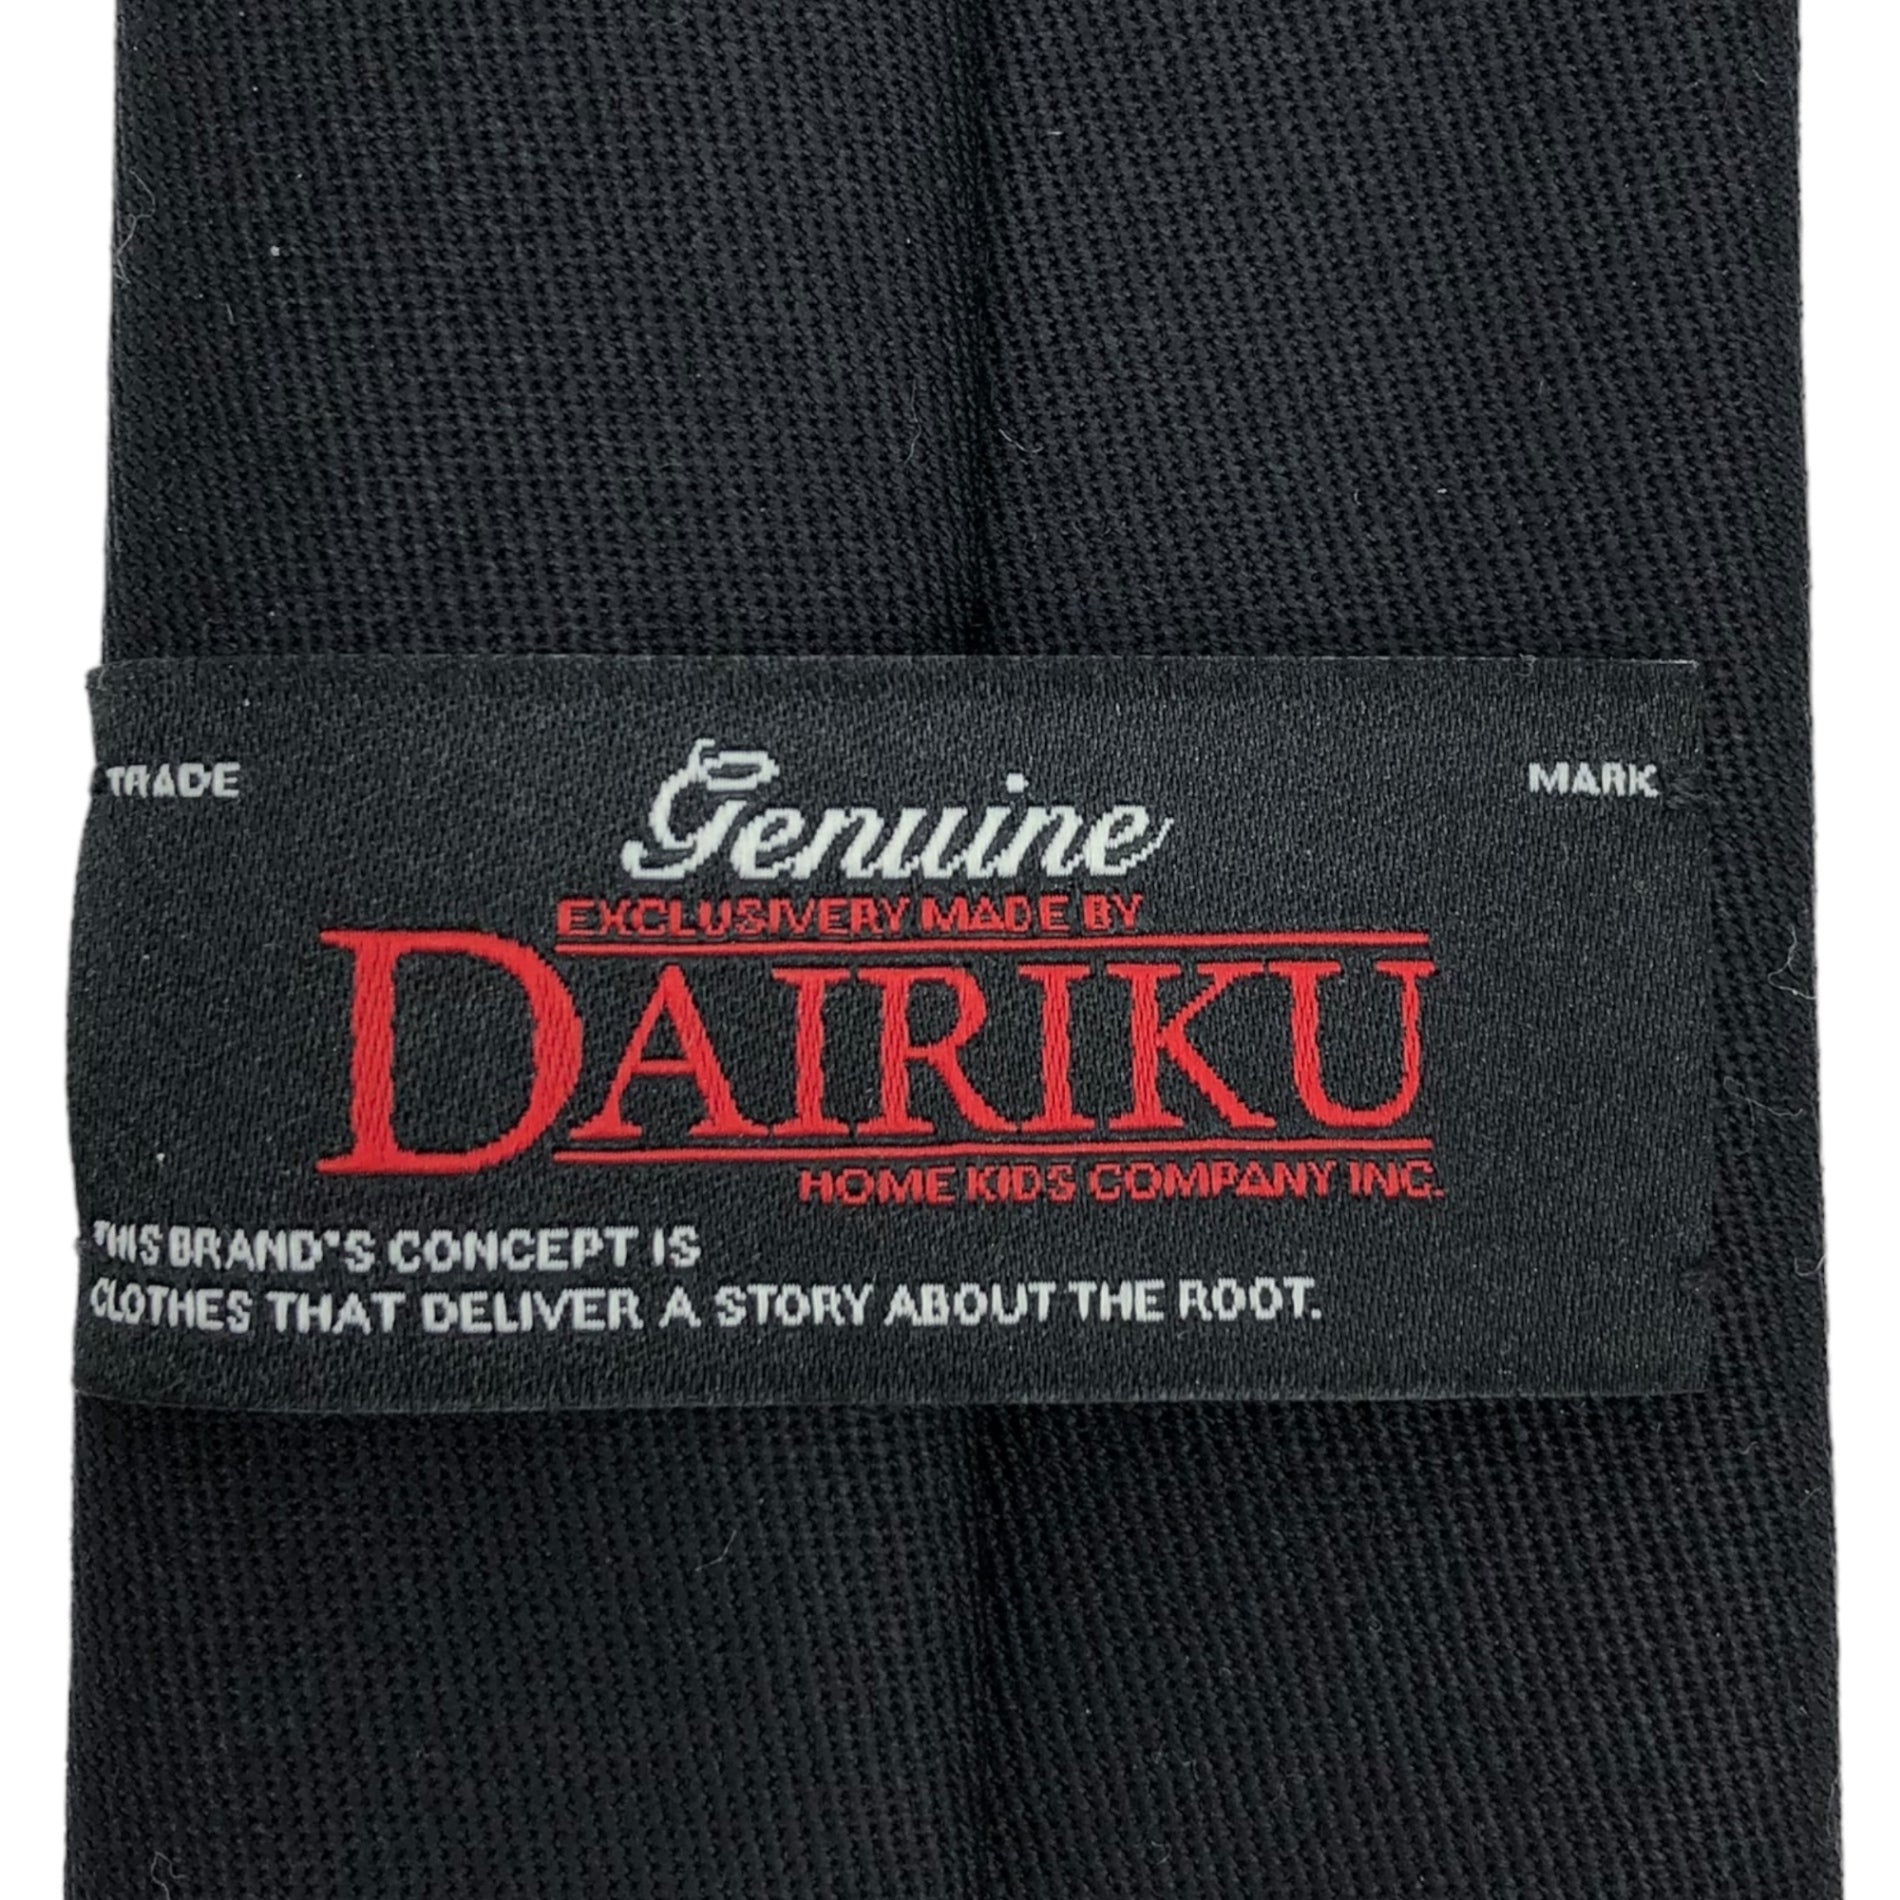 DAIRIKU(ダイリク) 22AW Wool Tie with Money Clip ウール ネクタイ ウィズ マネークリップ 22AW A-2 OR ACR A-1 ブラック